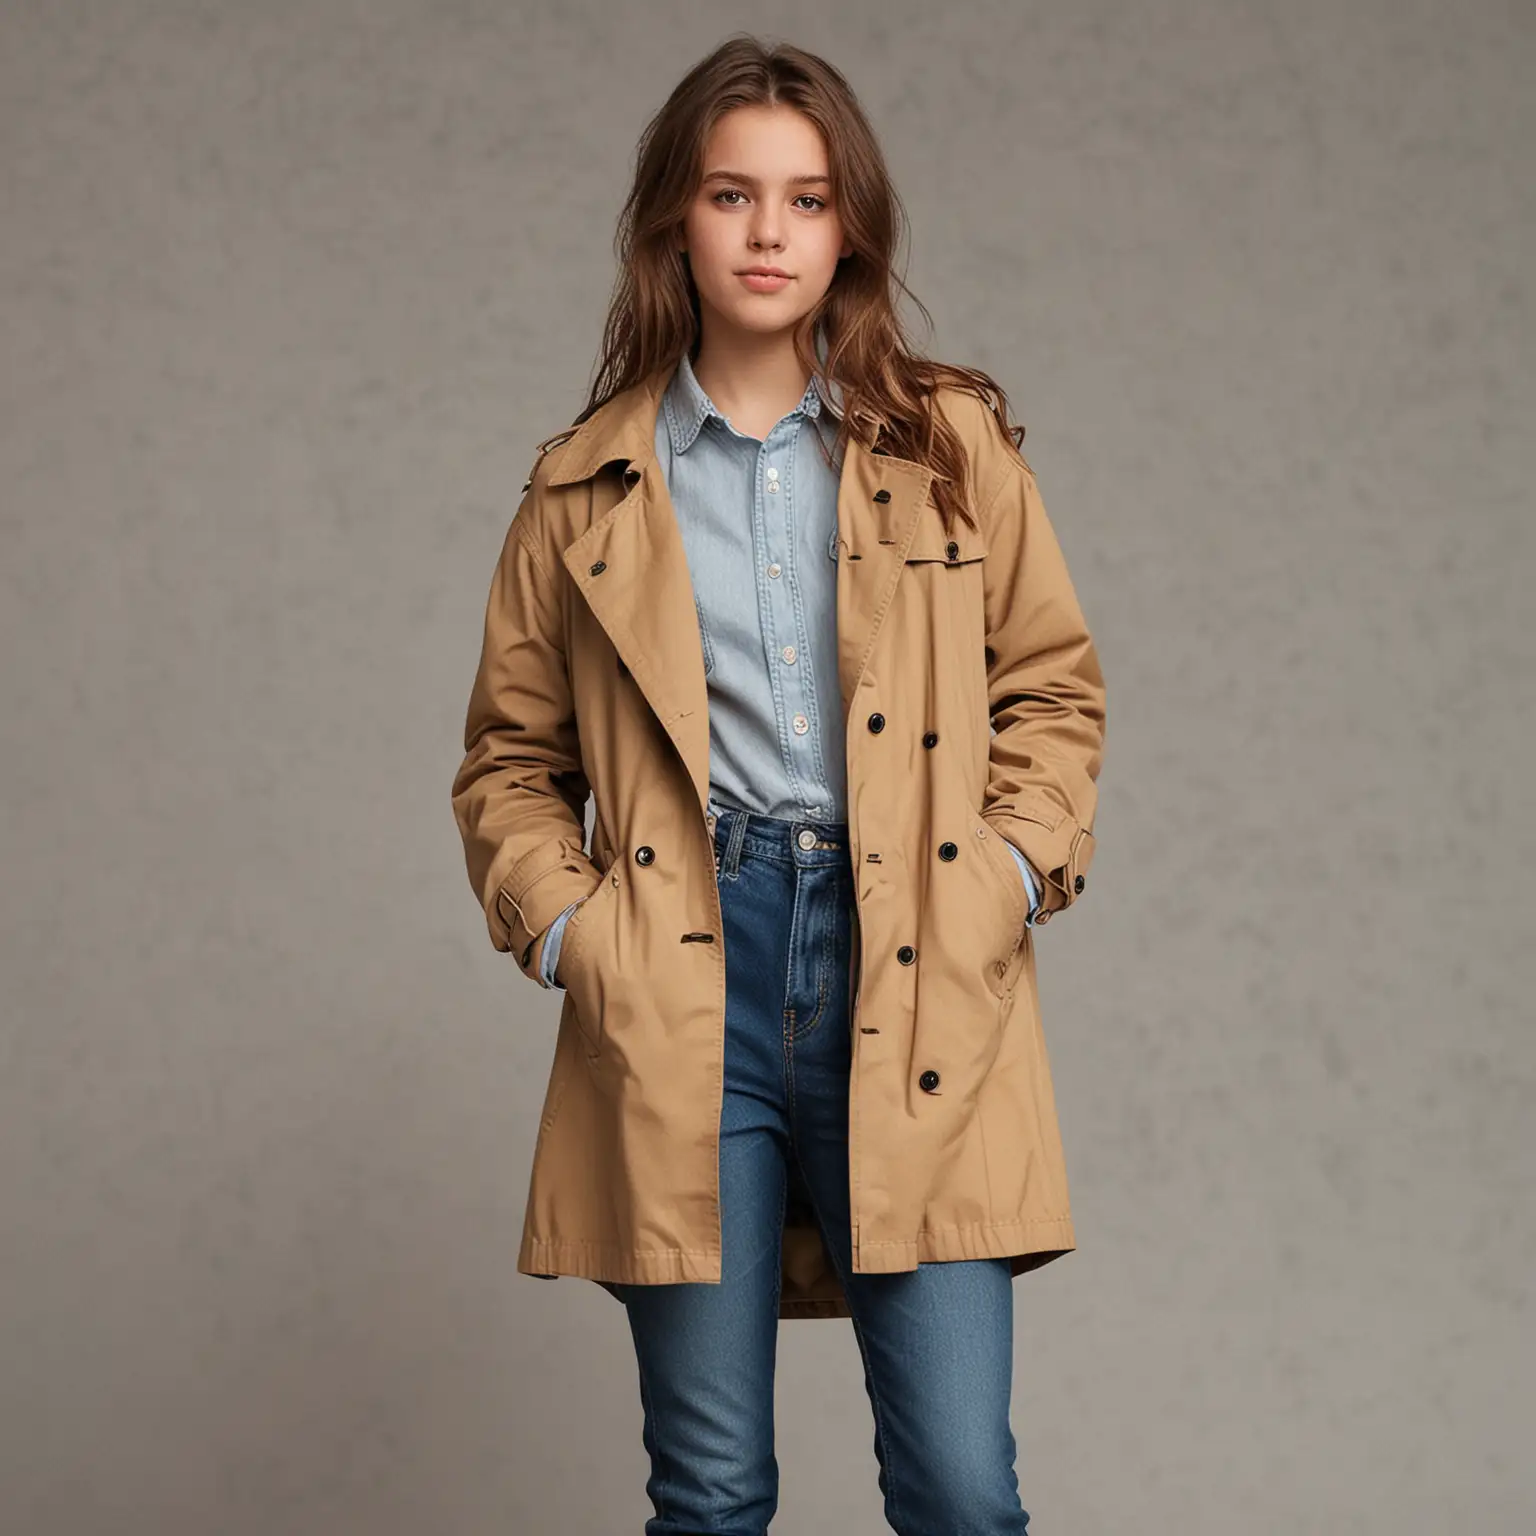 Teenage Girl in Trench Coat and Boots Standing Confidently